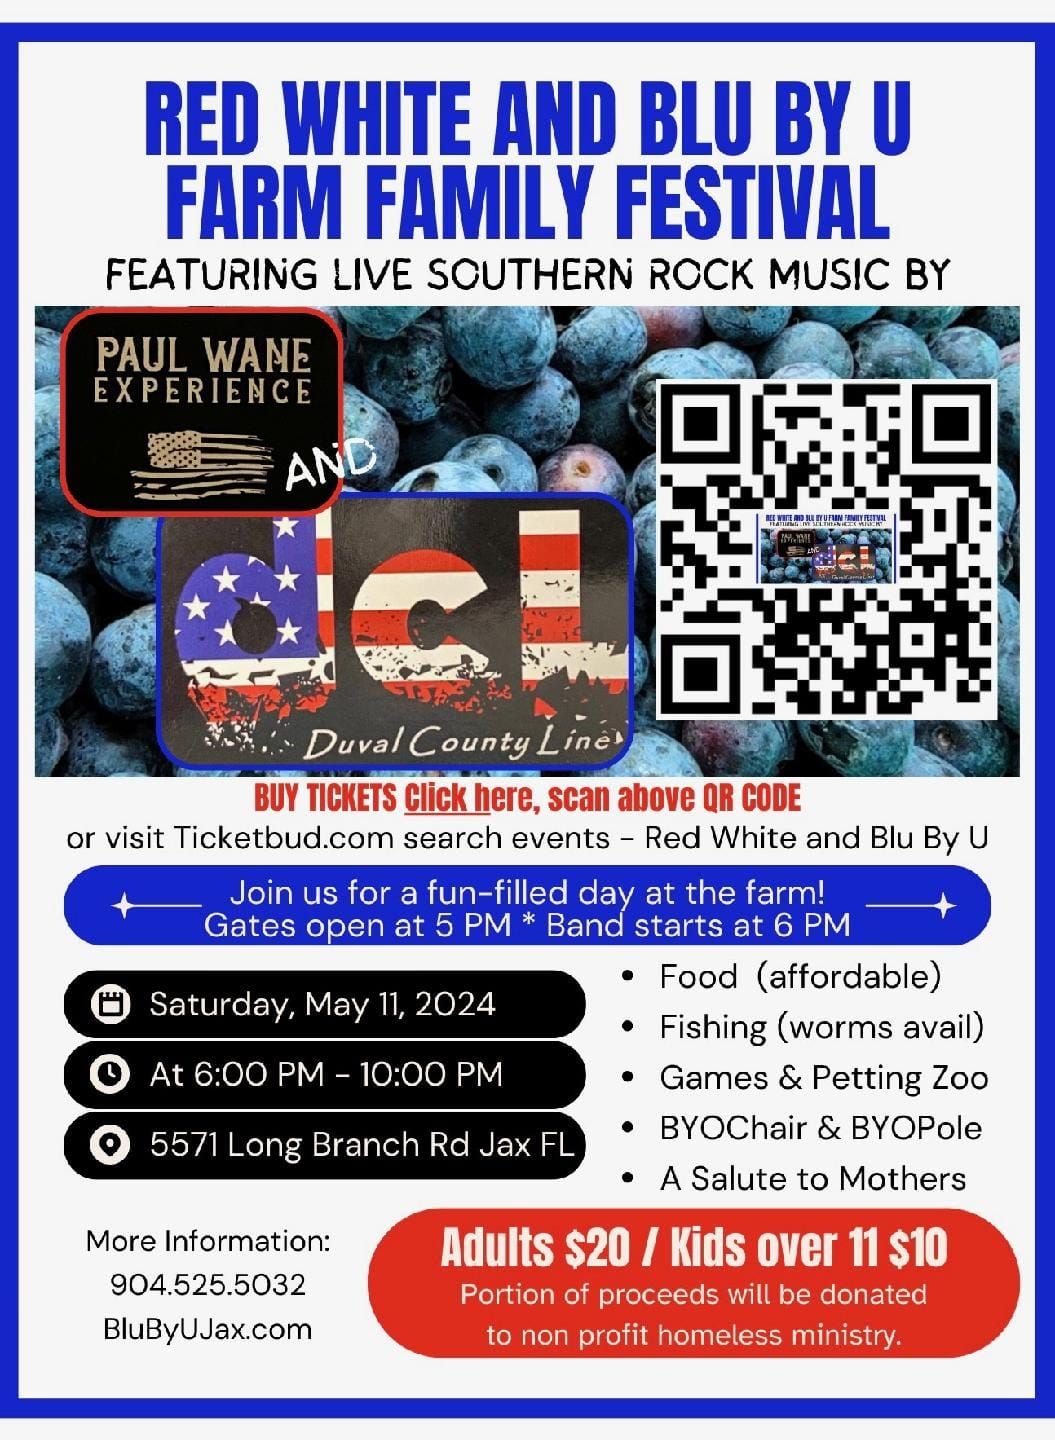 RED WHITE AND BLU BY U FARM FAMILY FESTIVAL: A SALUTE TO MOTHERS 